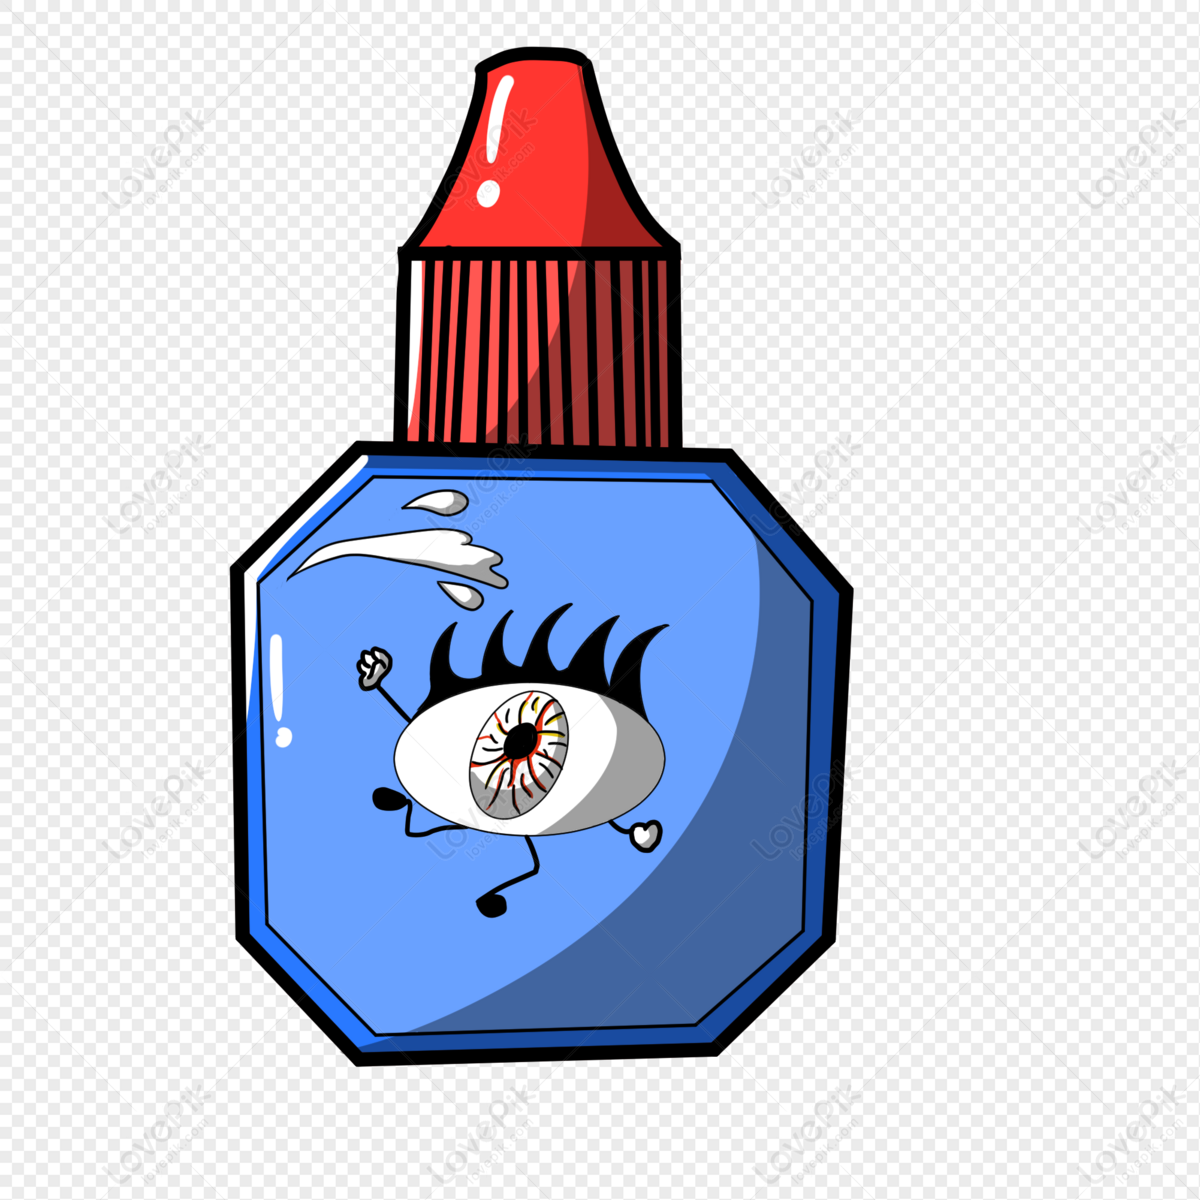 Eye Drops PNG Transparent Image And Clipart Image For Free Download -  Lovepik | 401371727